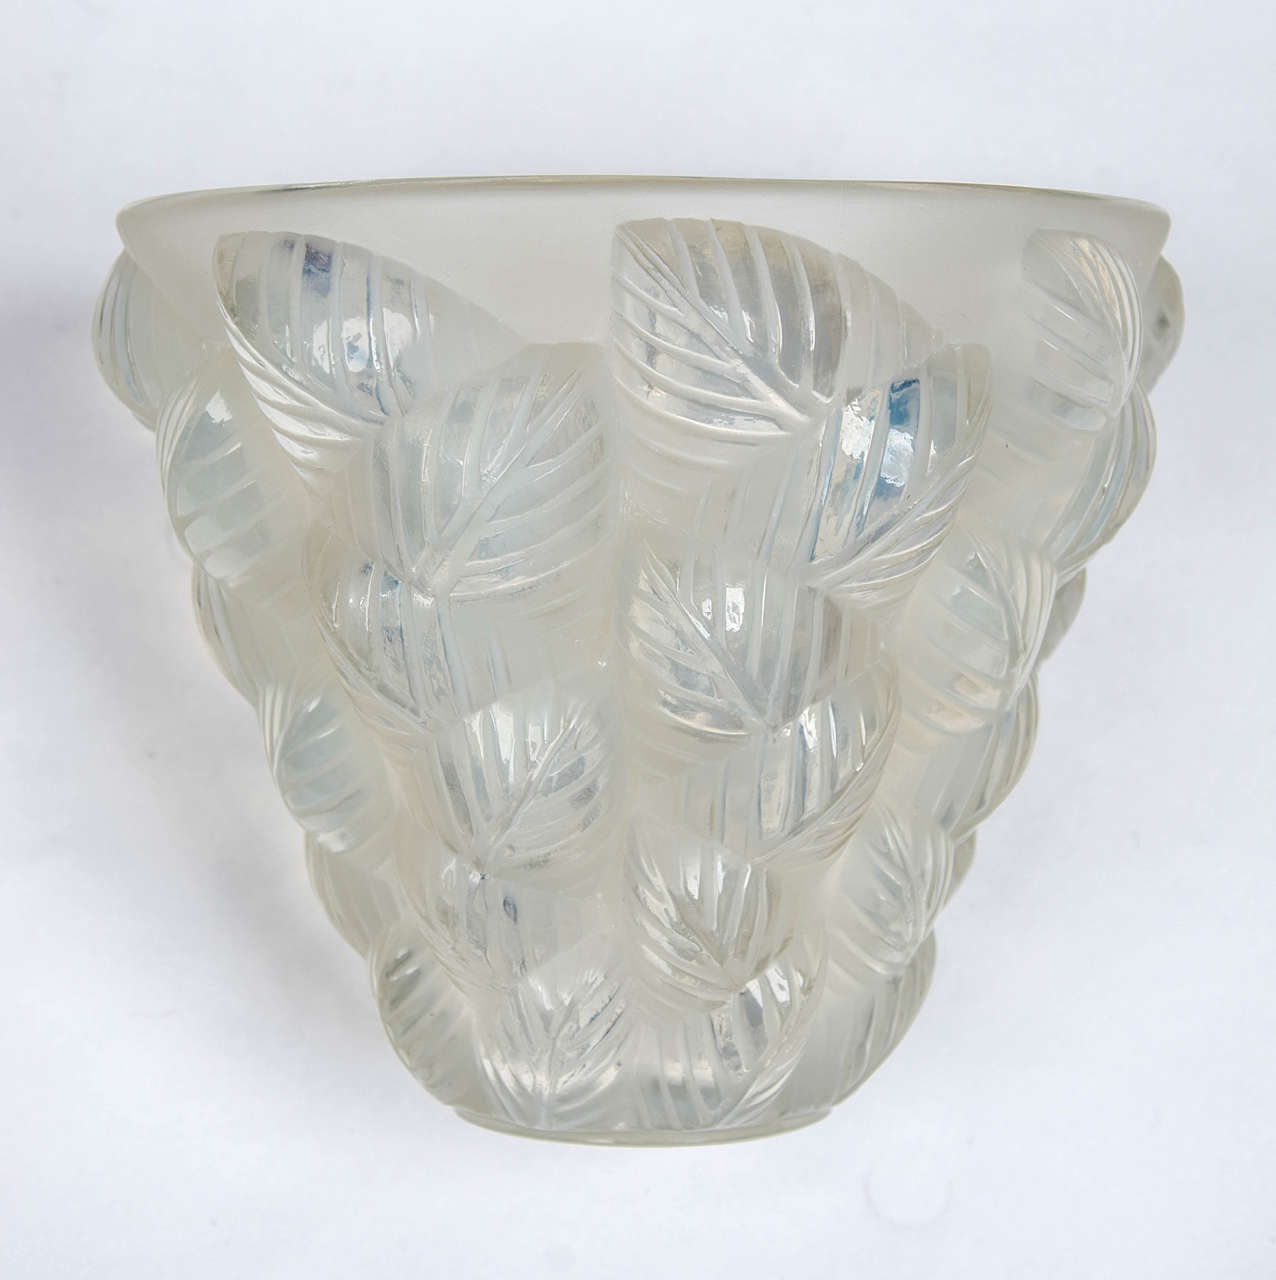 Mossaic, an Art Deco blue opalescent glass vase by René Lalique, (1860-1945). Relief decorated with a geometric leaf design. Excellent original condition.